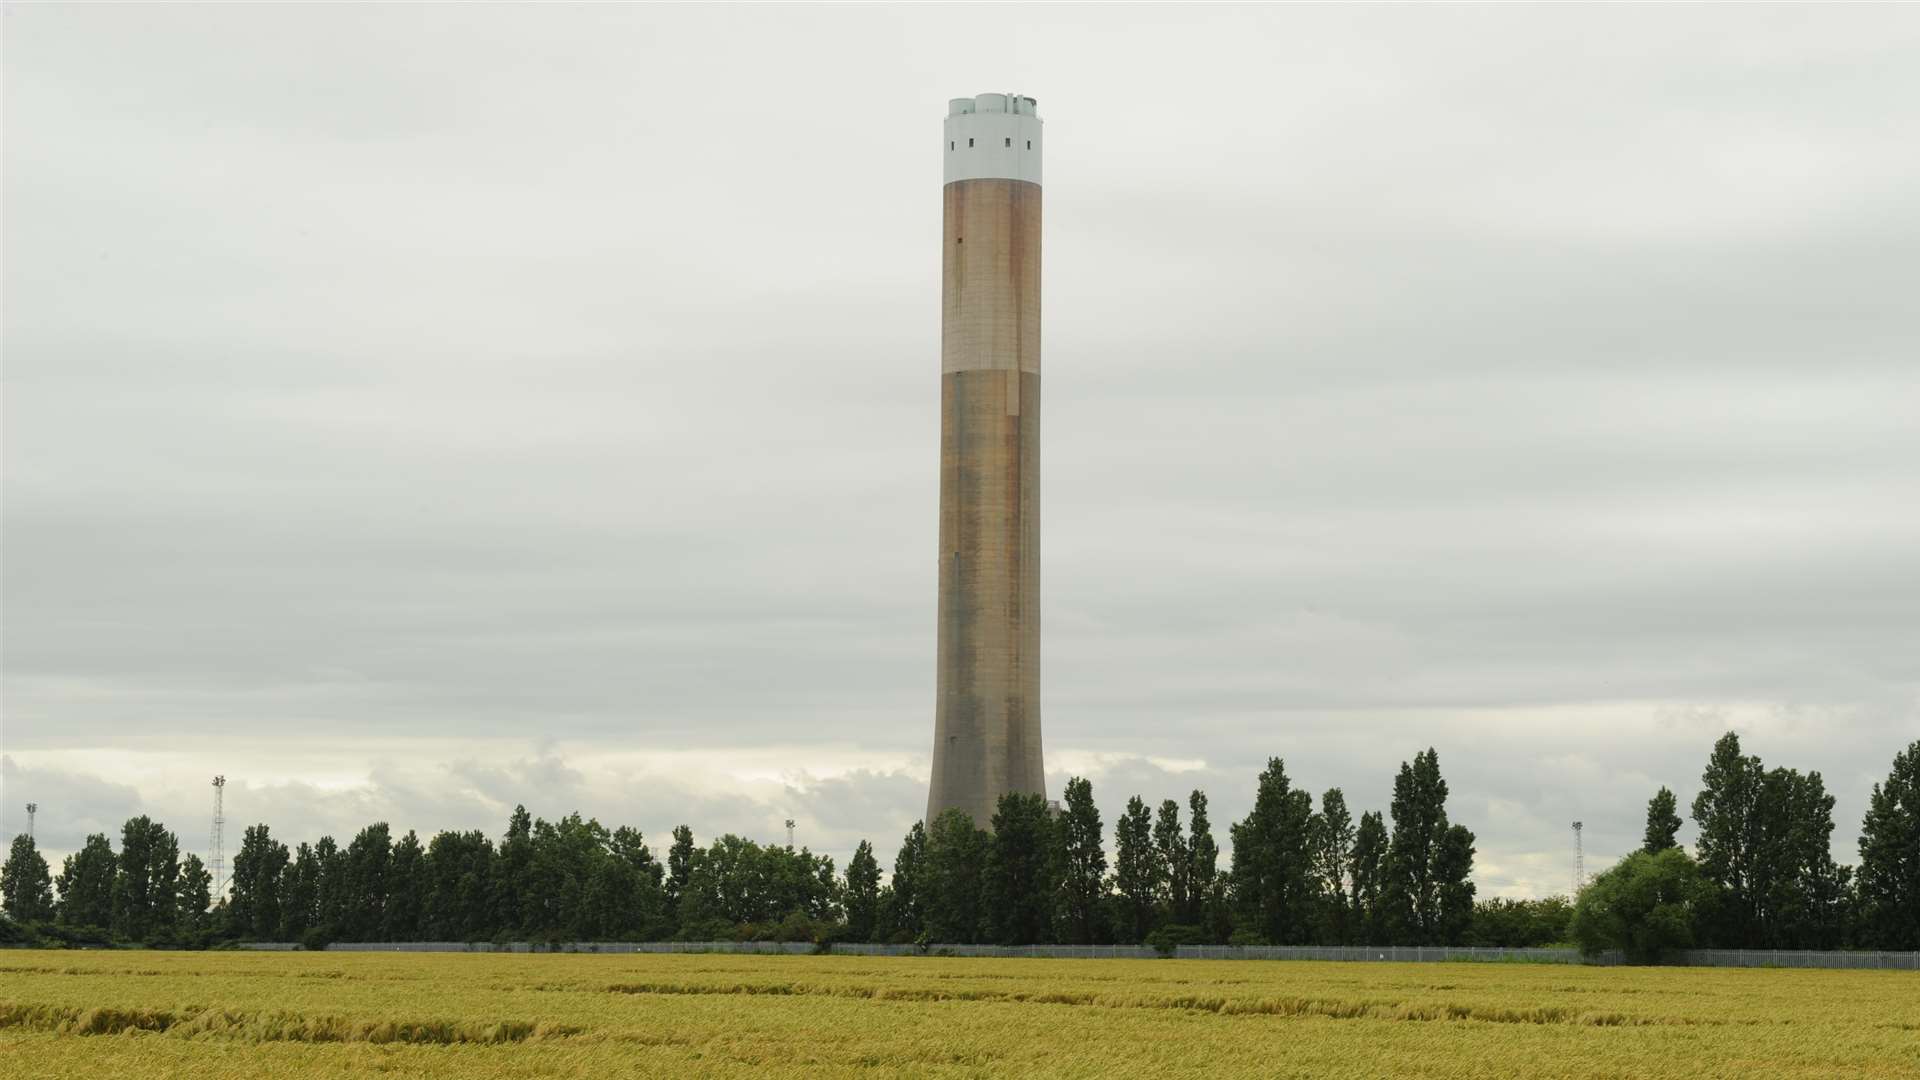 Grain power station chimney will be blown up next week